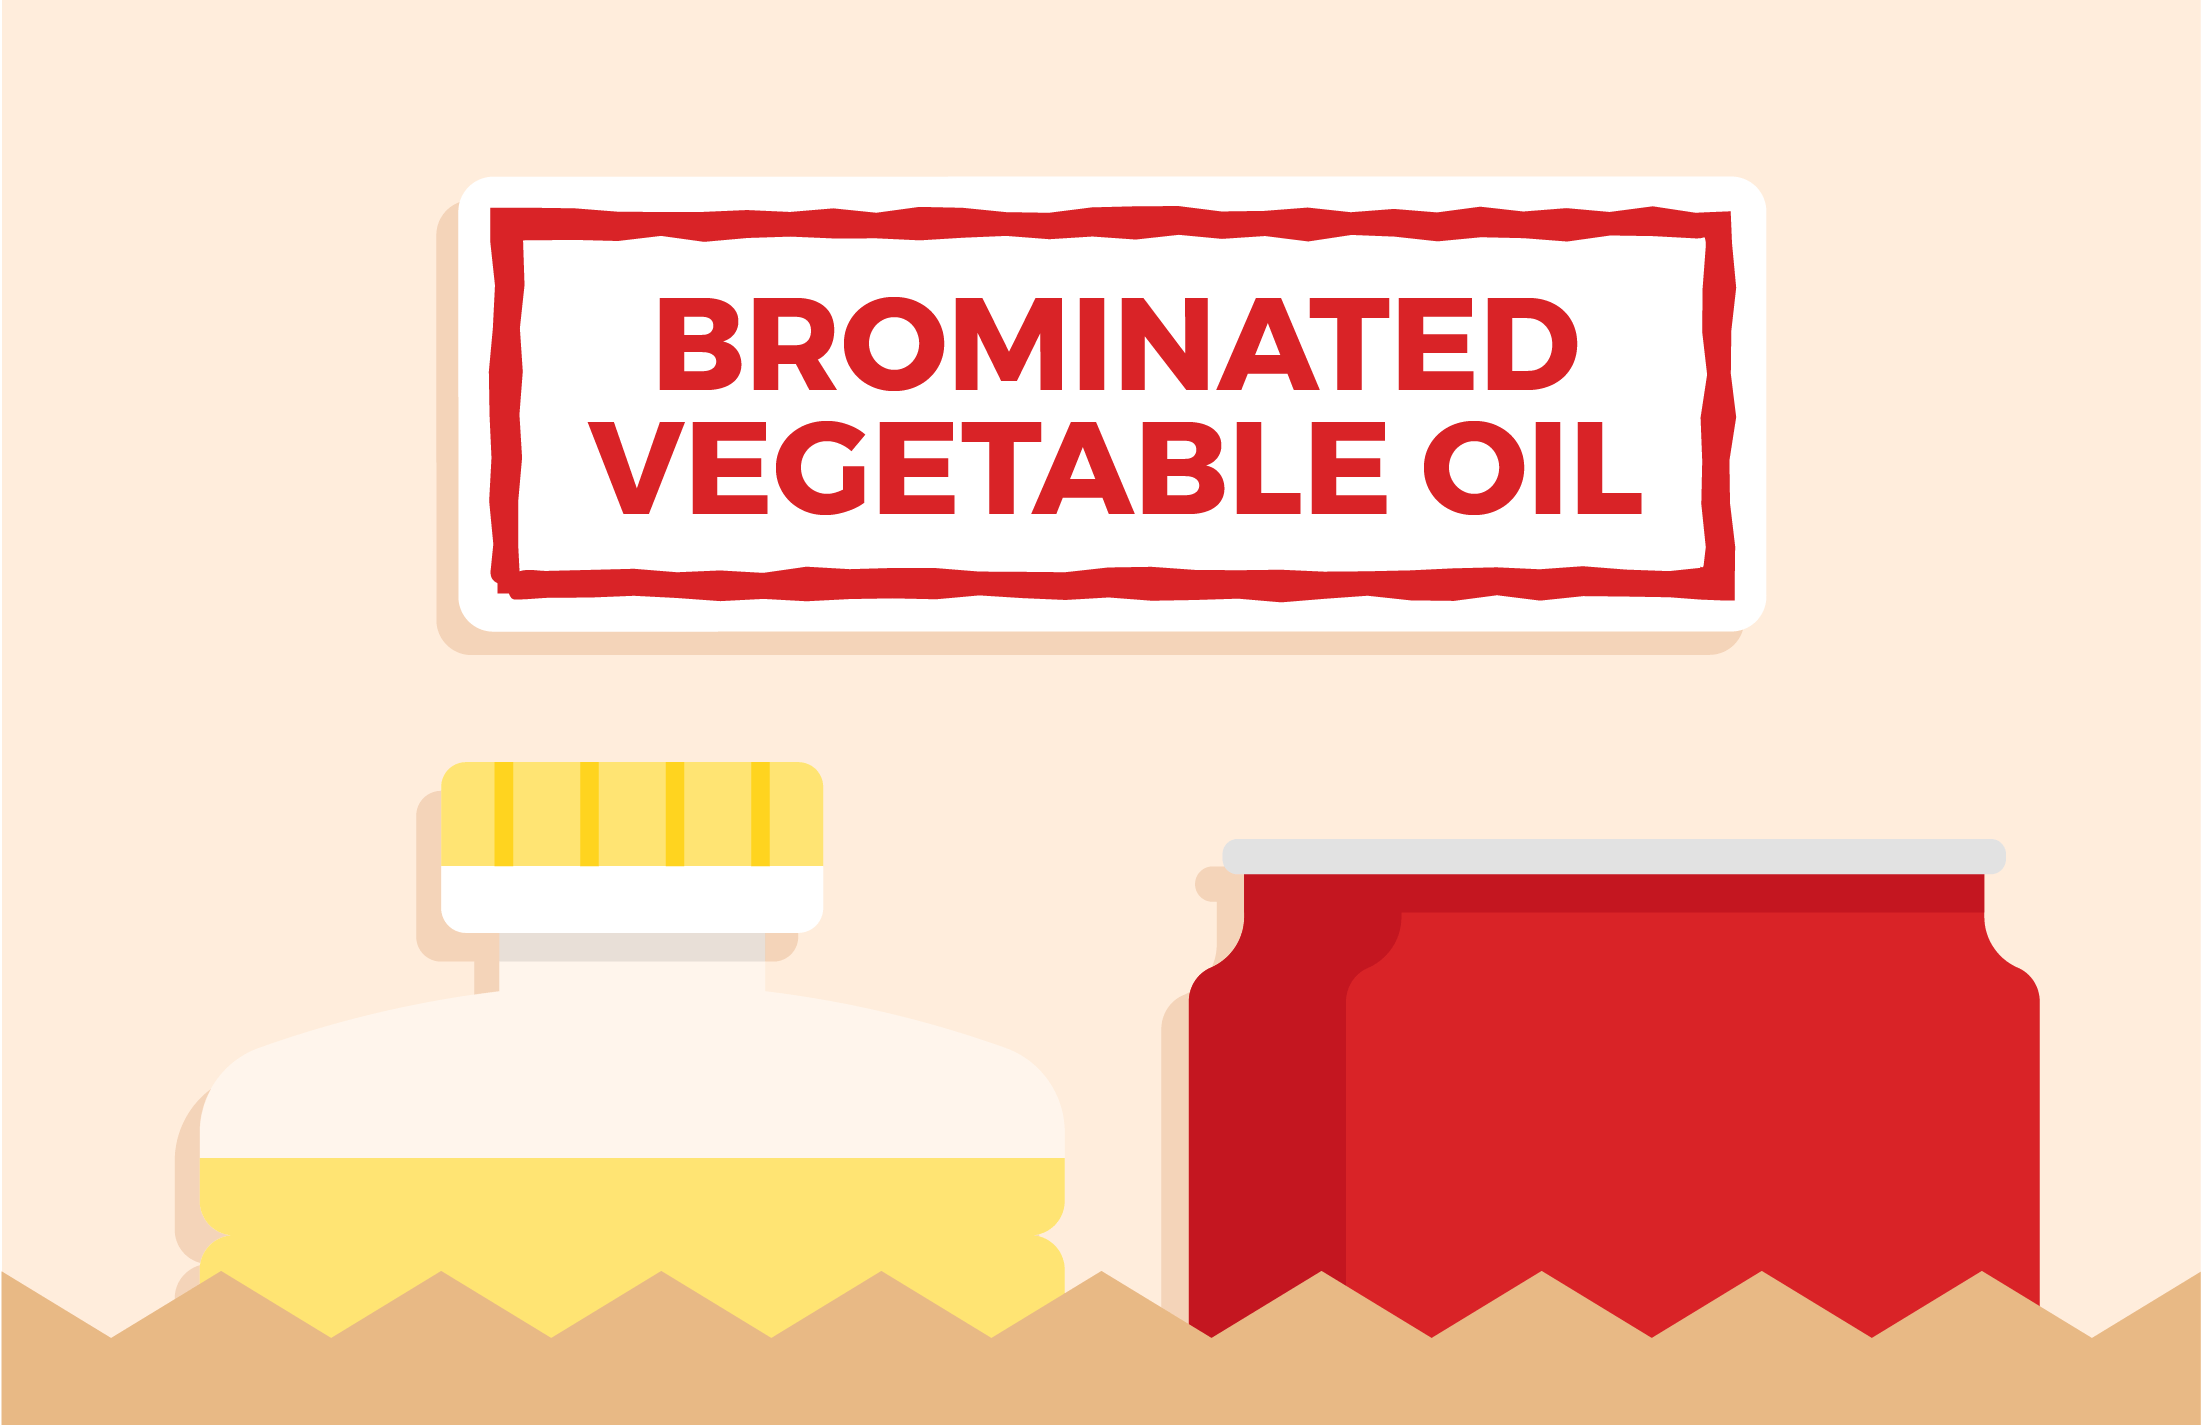 Brominated Vegetable Oil. Two containers of oil. Illustration